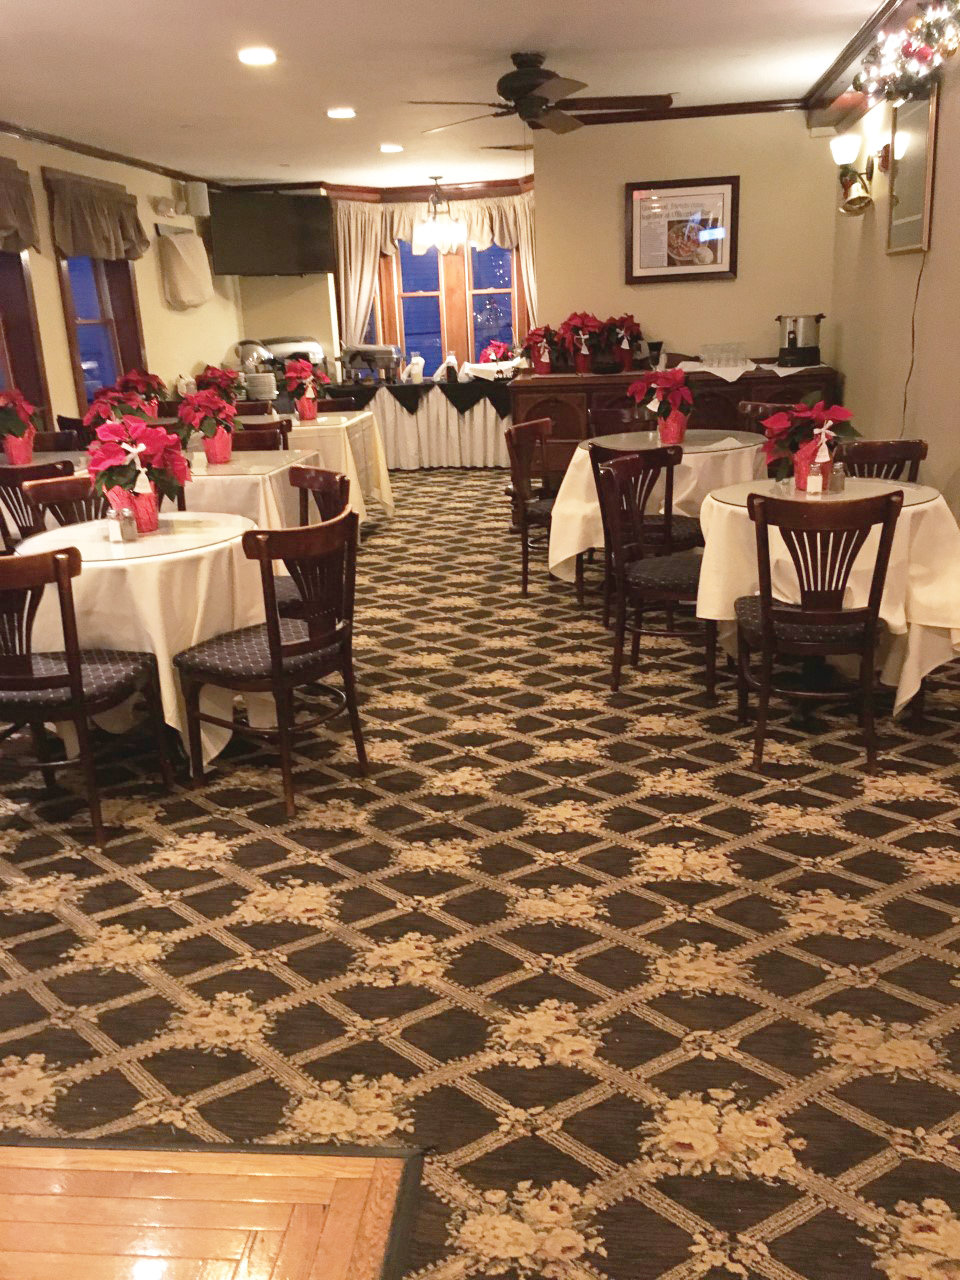 Come to Breffny’s, a casual and inviting private function room located on the second floor of Pawtuxet Village’s popular O’Rourke’s Bar & Grill.  With the dog days of summer slowly coming to an end, now is the perfect time to liven up your life and host a party for any occasion!  Call 401-499-7061 for details.